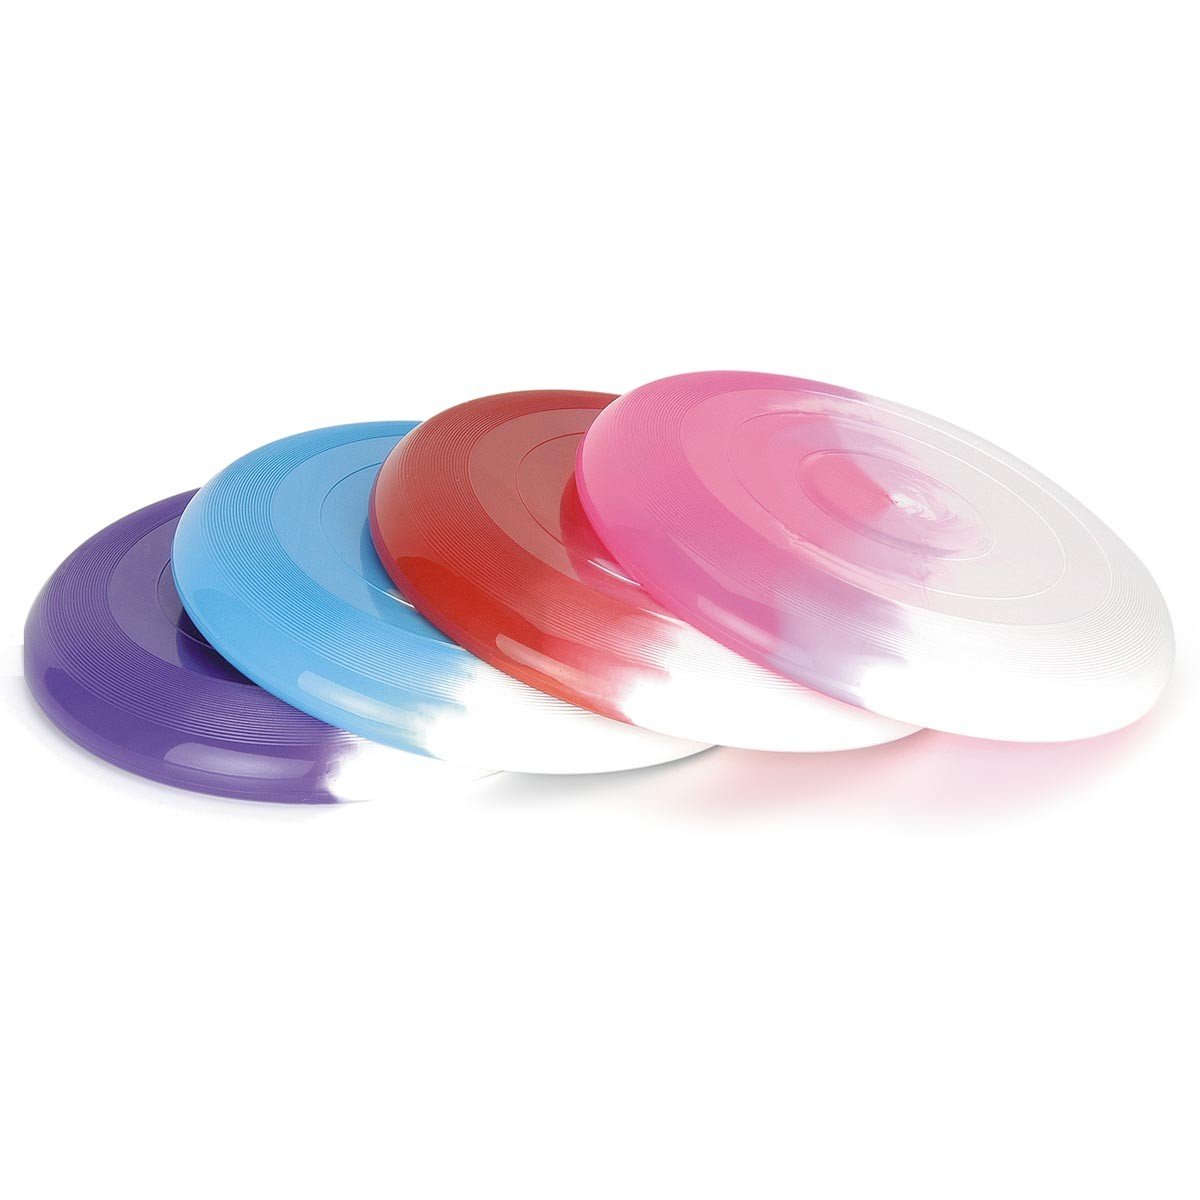 Marbled Frisbee